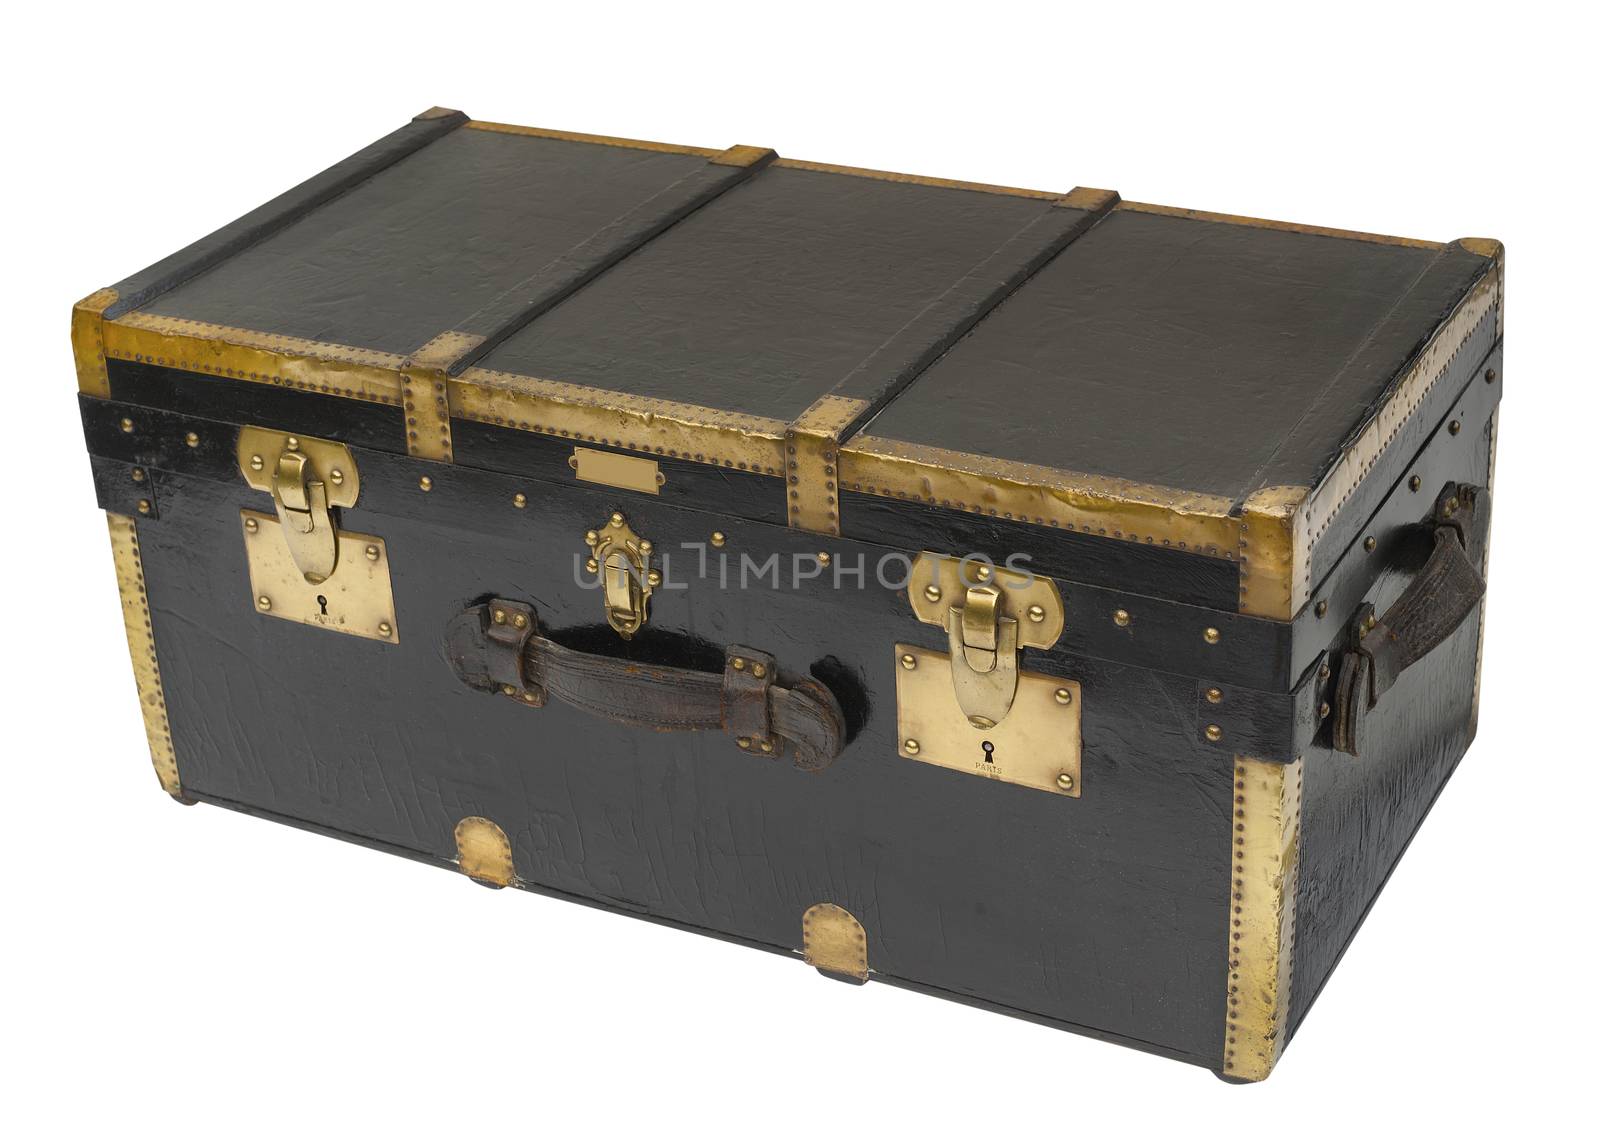 Antique steamer trunk lock and latches in brass, leather and wood custom made in Paris before WWII, isolated